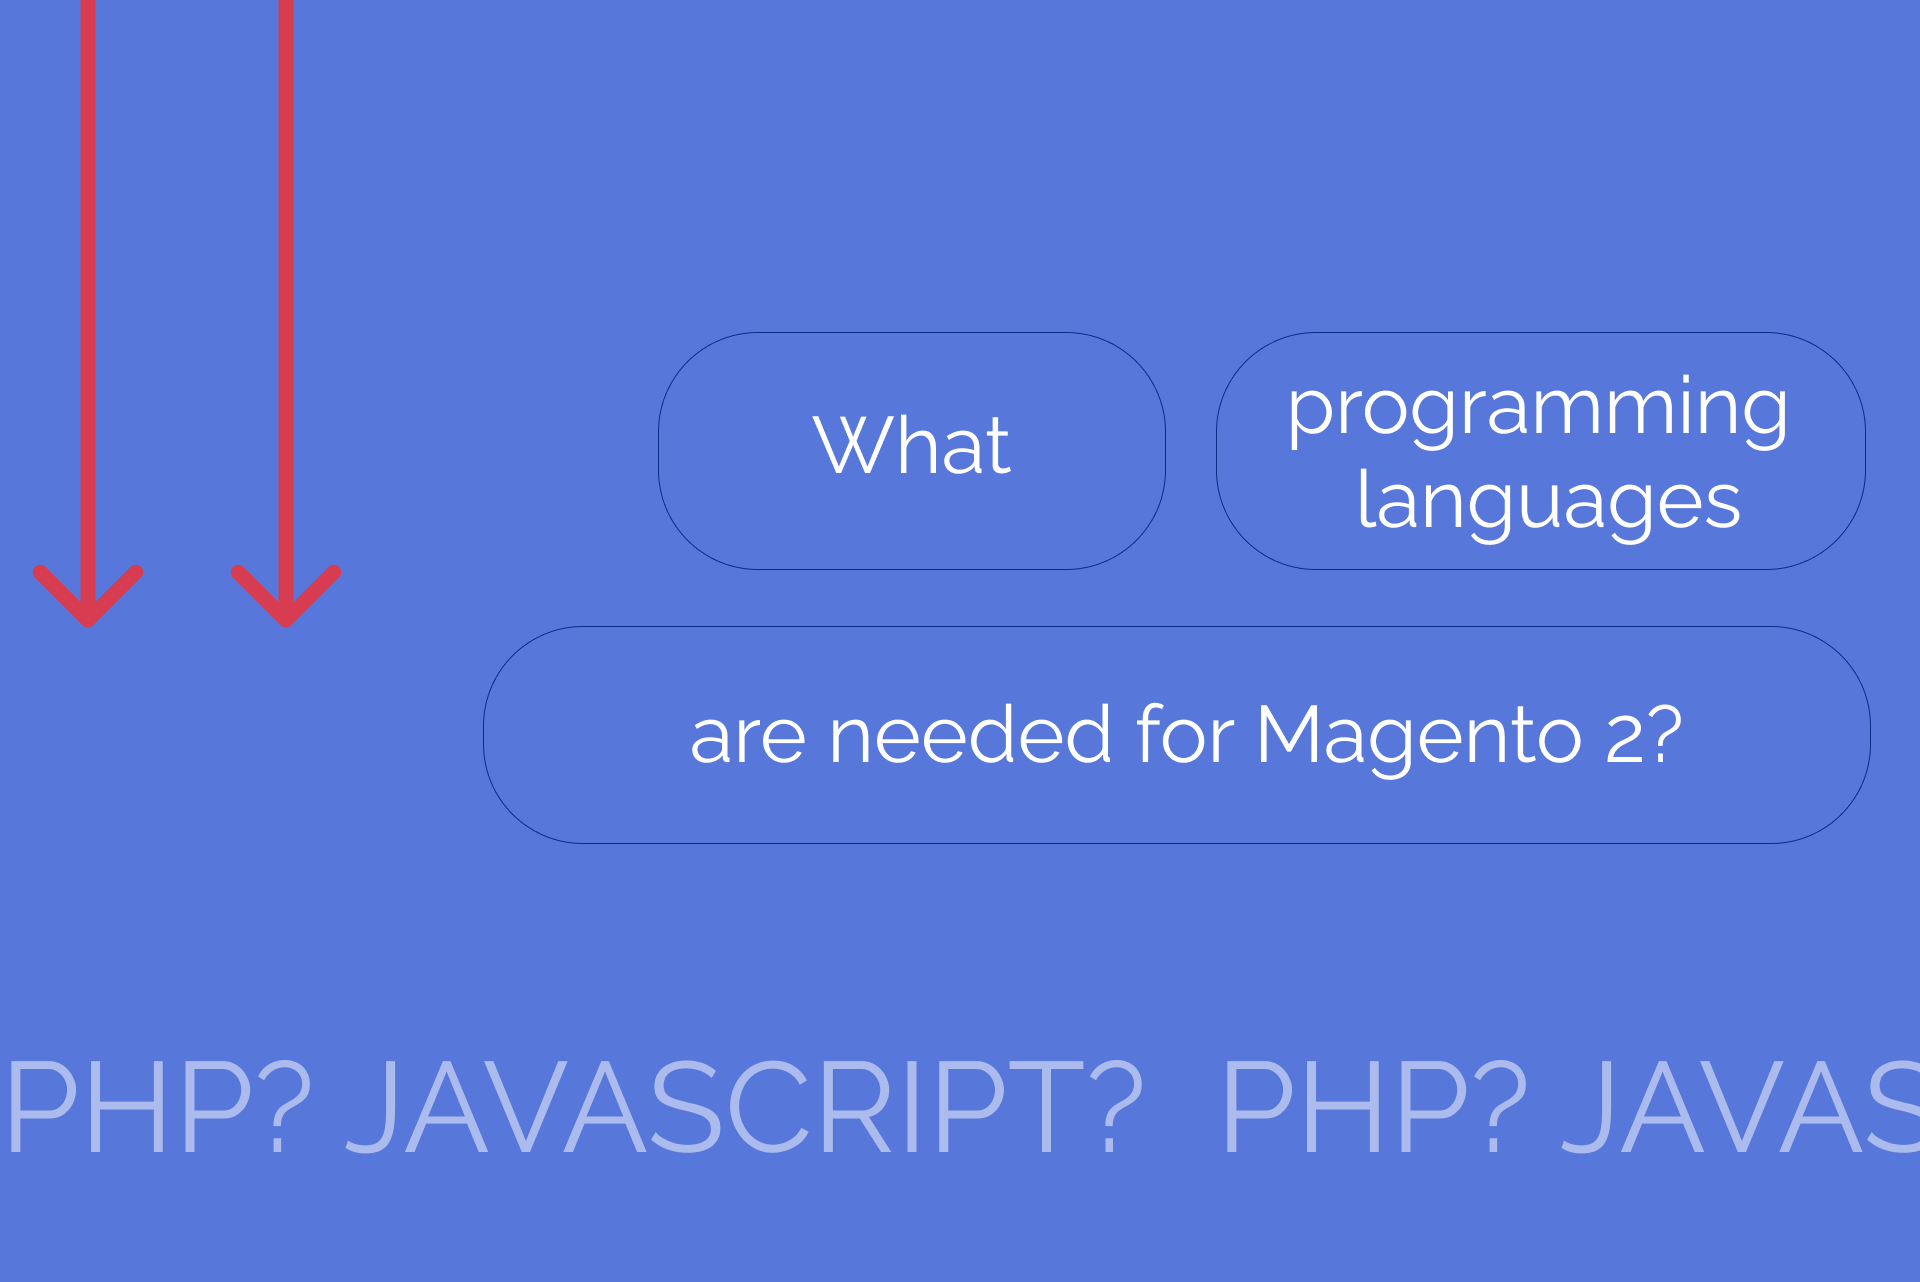 What programming languages do you need for Magento 2?